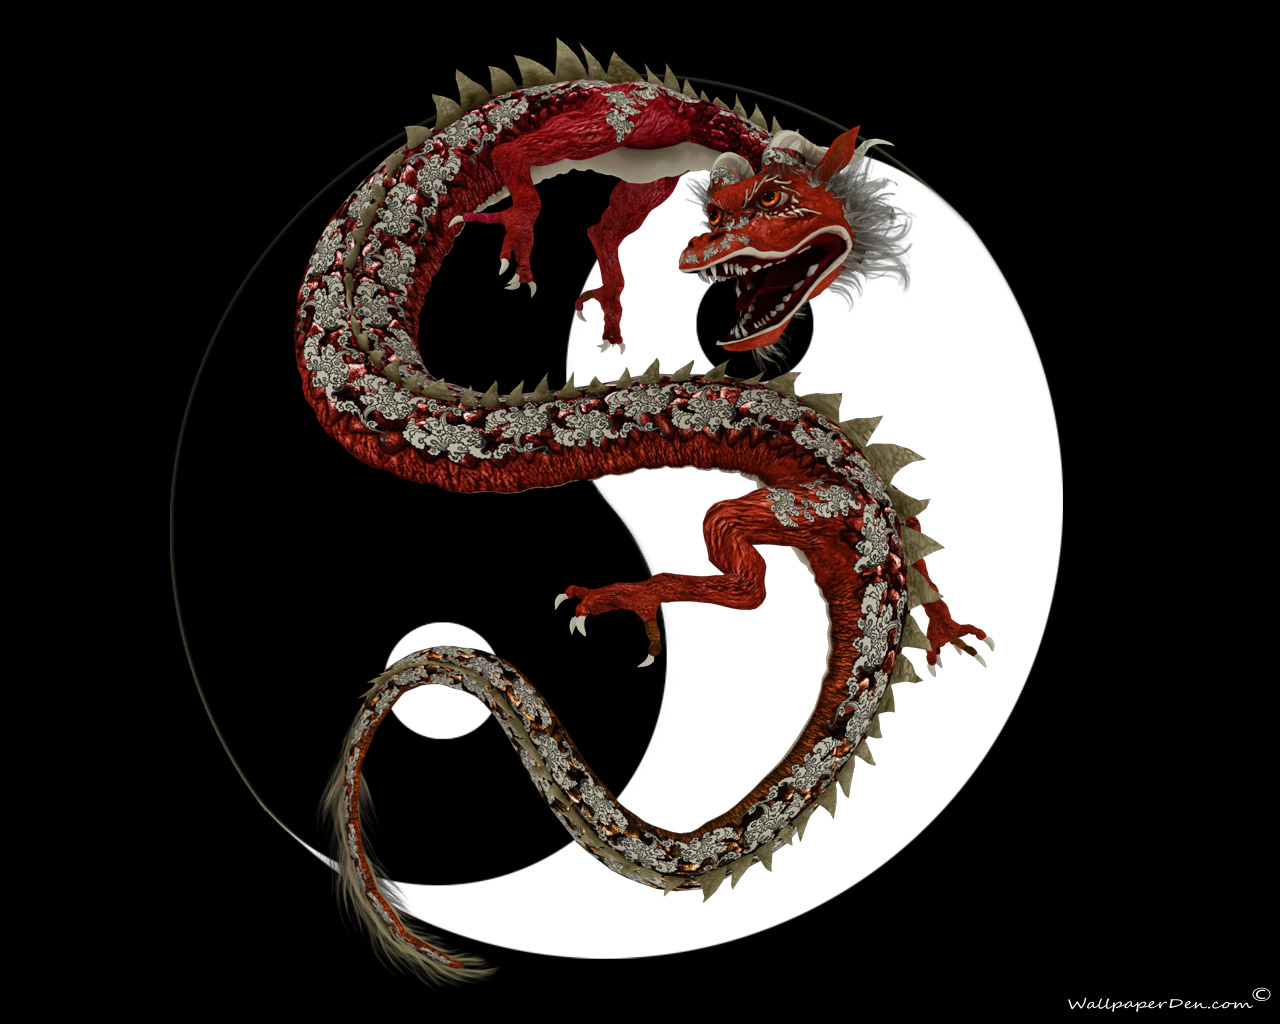 Chinese Dragons Wallpaper Background HD With Resolutions